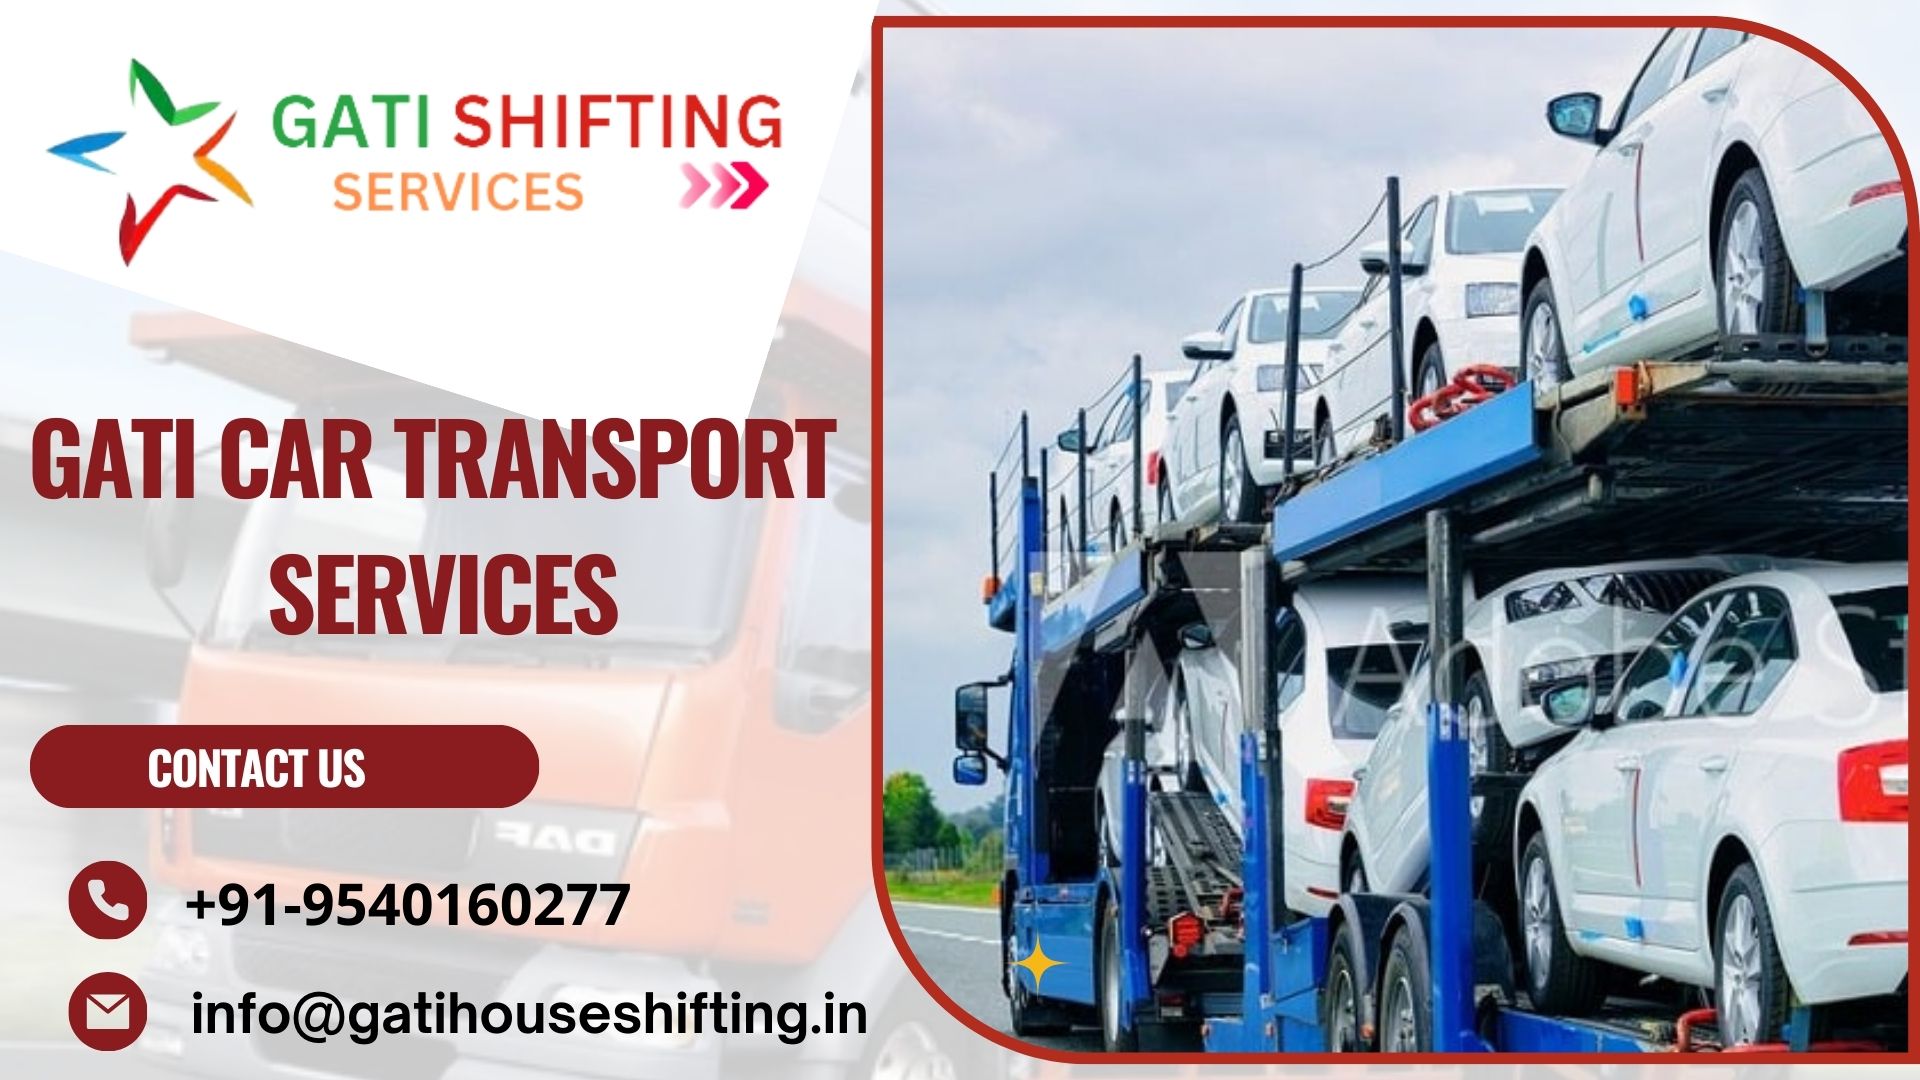 Car transport services in Pune